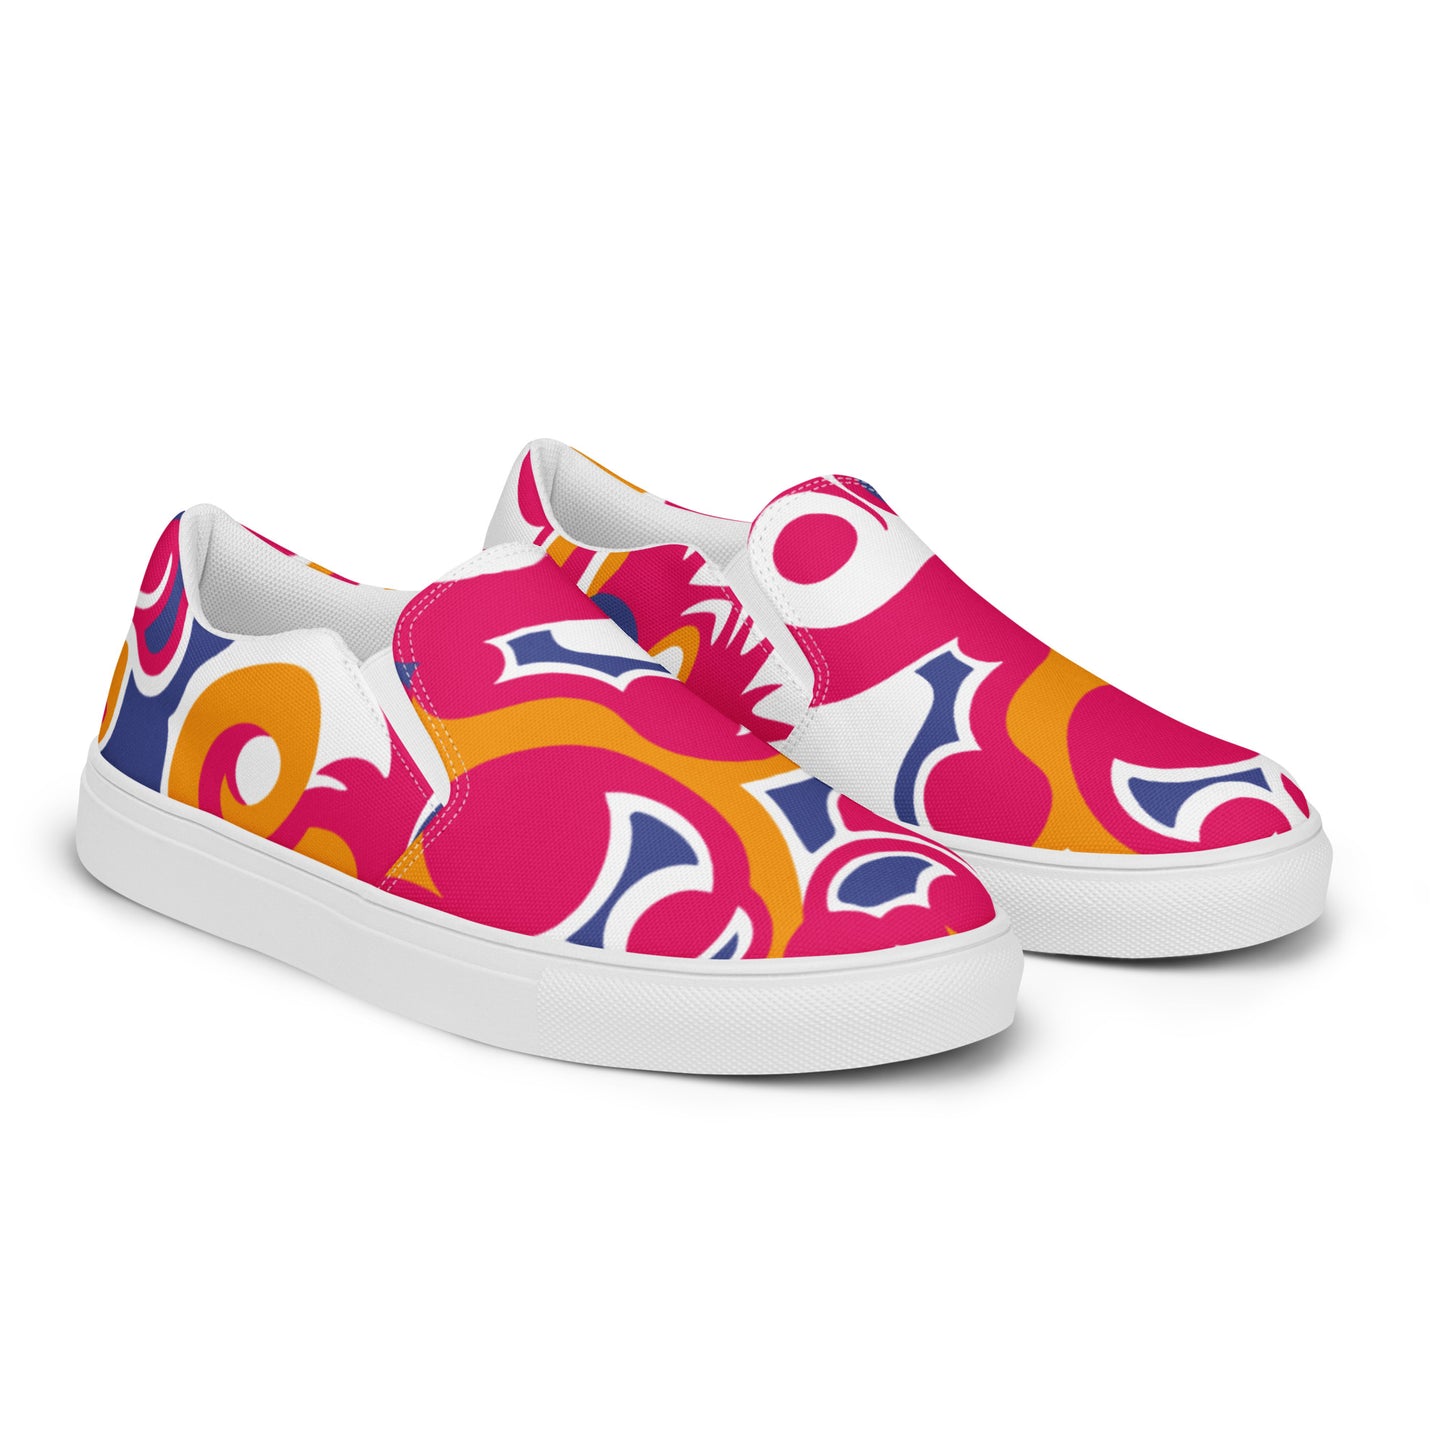 JAZZ by LAPD - Men’s slip-on canvas shoes